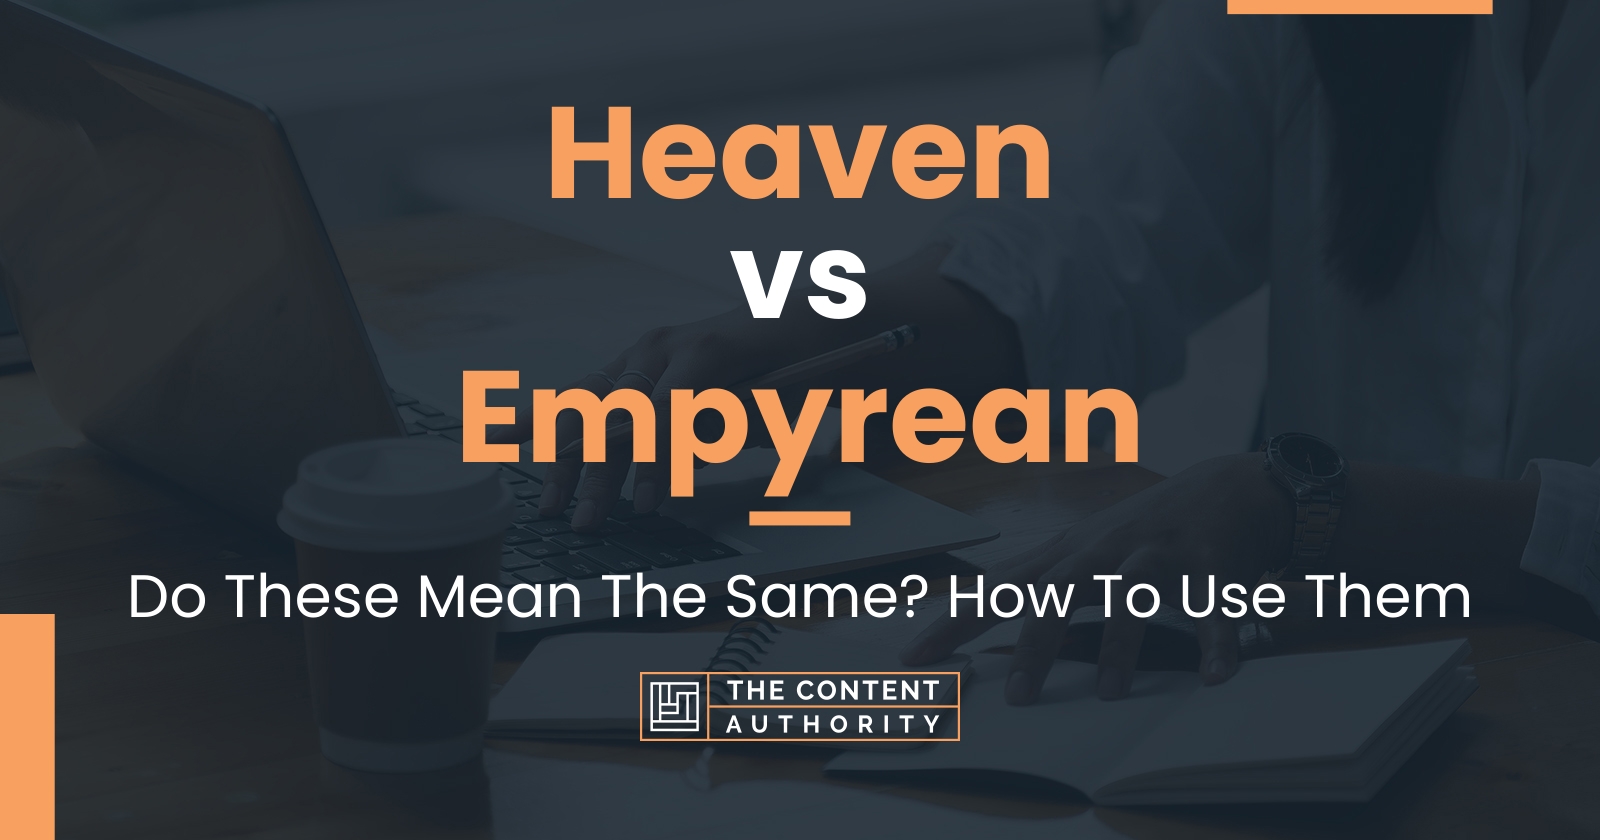 Heaven vs Empyrean: Do These Mean The Same? How To Use Them